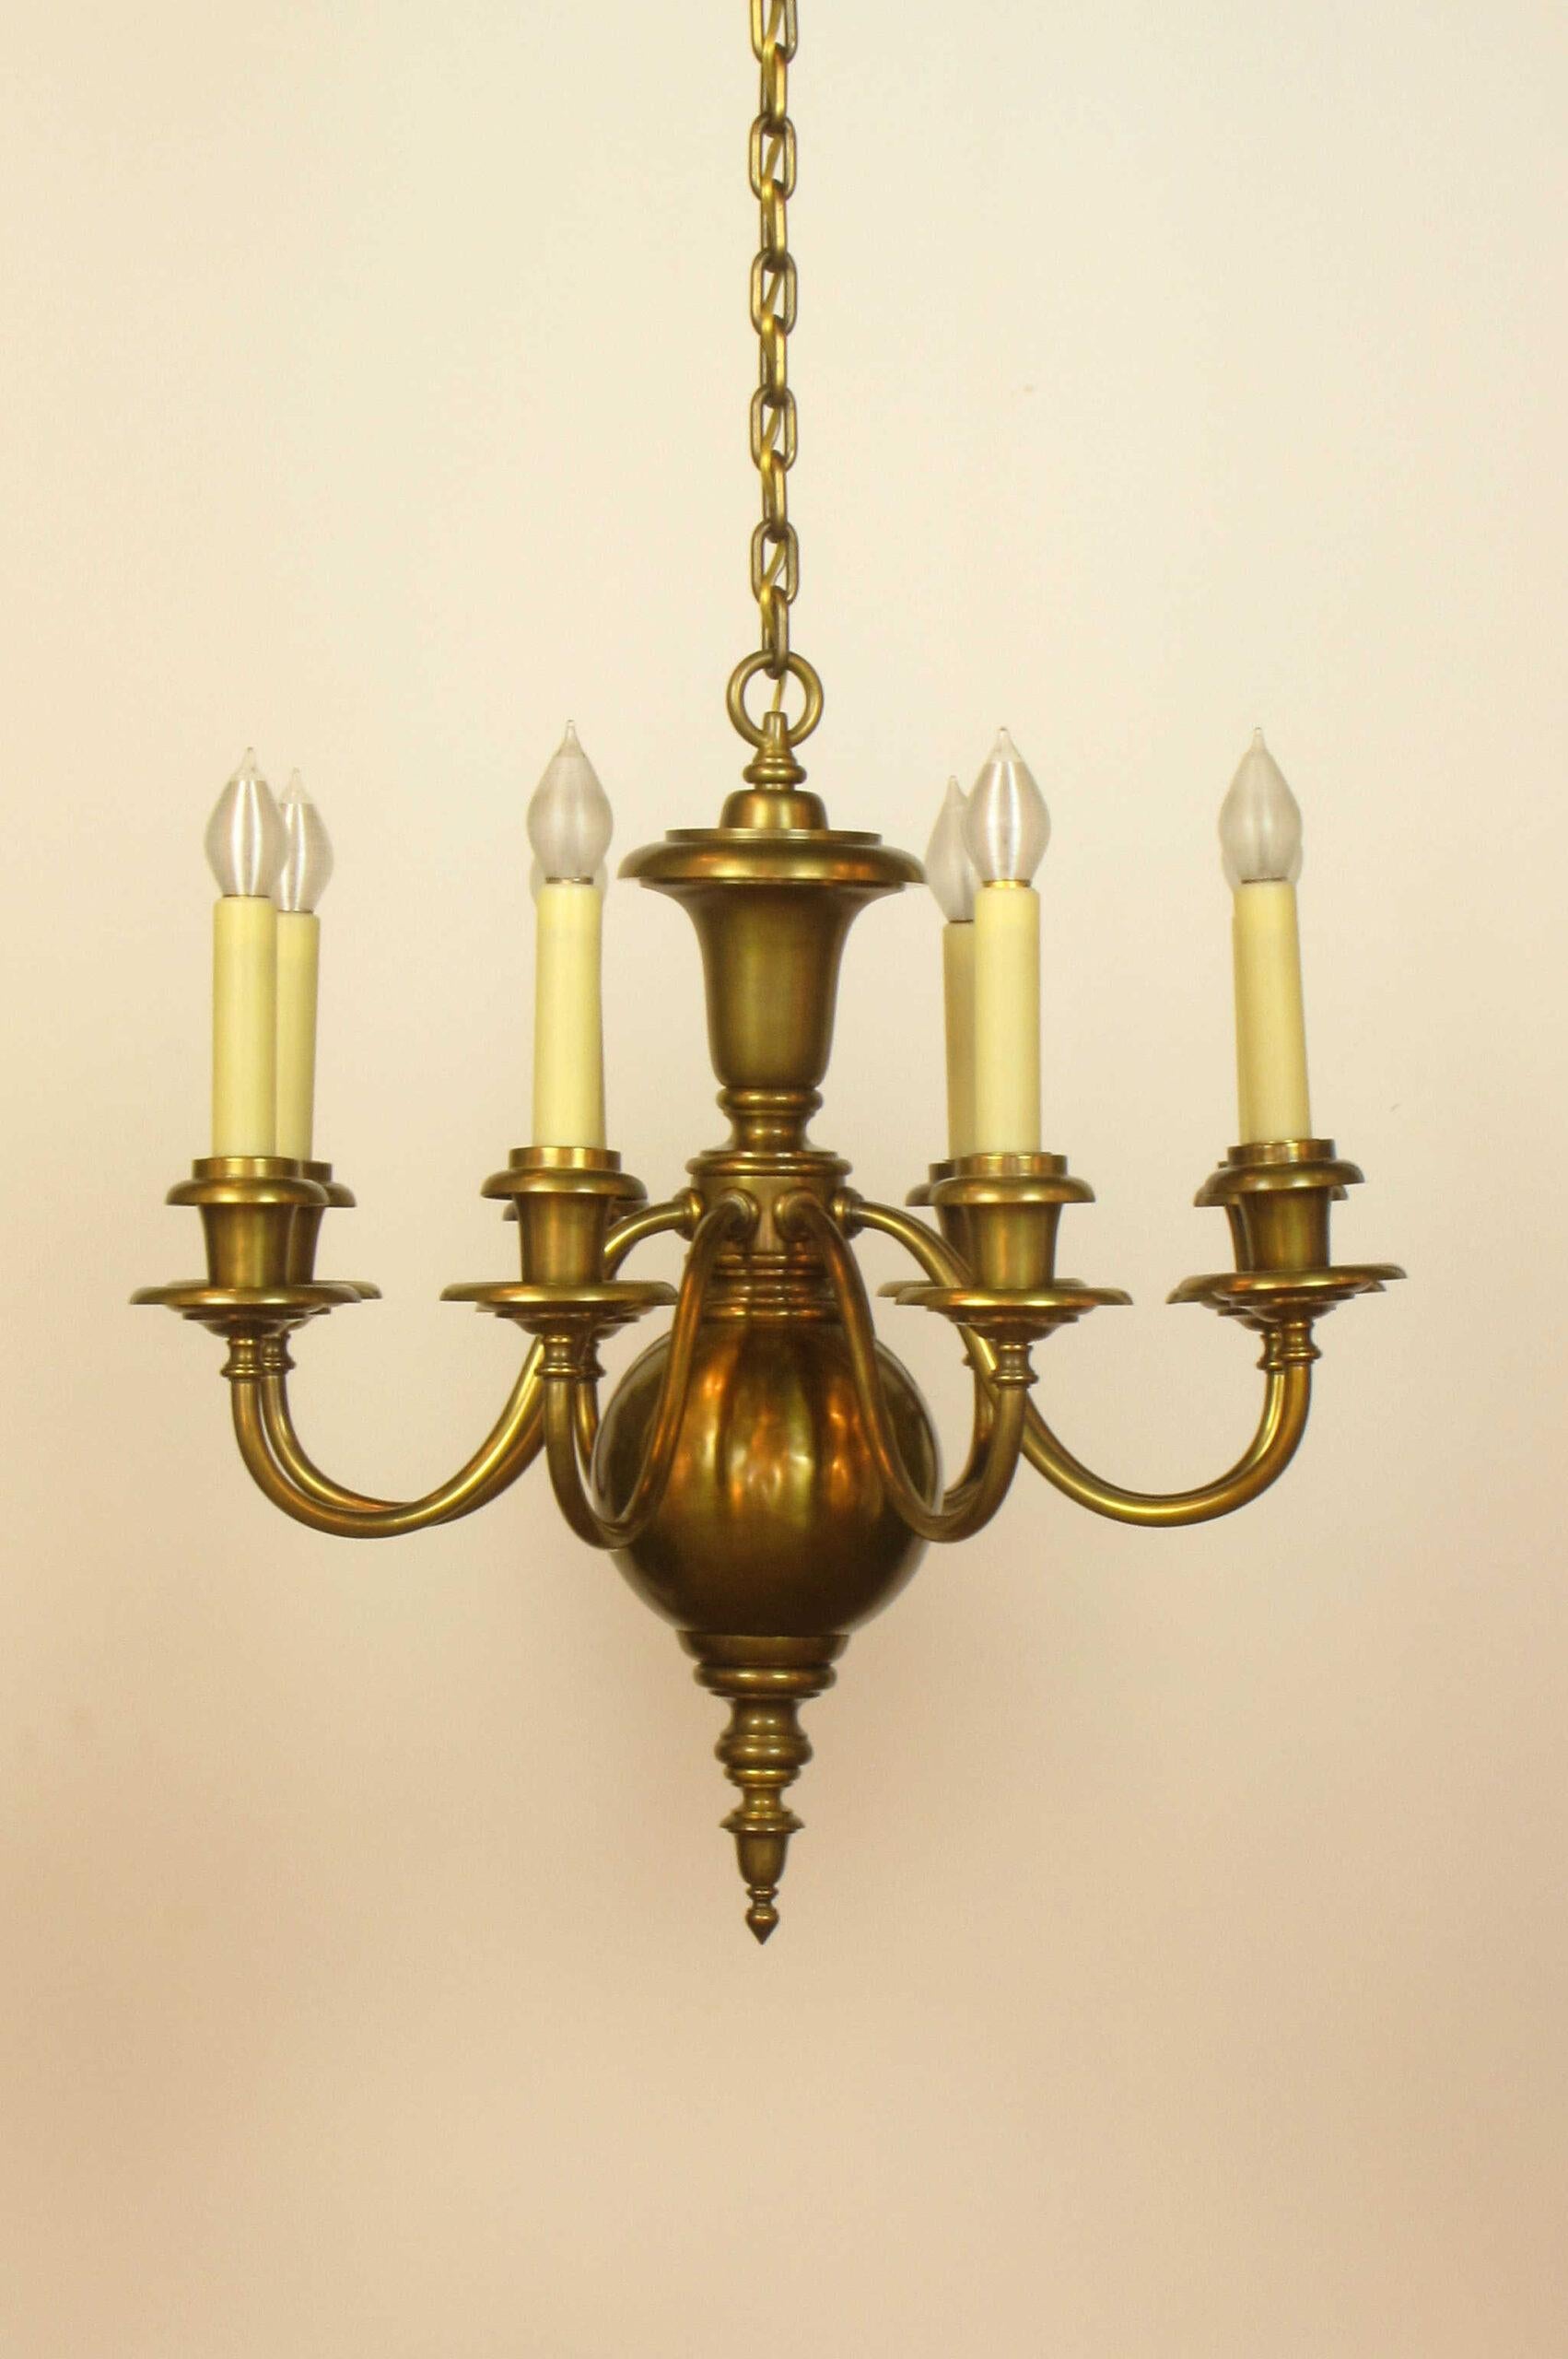 Eight Arm Colonial style Chandelier. Antique brass finish. C. 1910
A fine example of decorative lighting from the early electric period. Heavy brass chain and canopy. An urn form top, eight up curved arms, and a bottom ball. This piece has a very